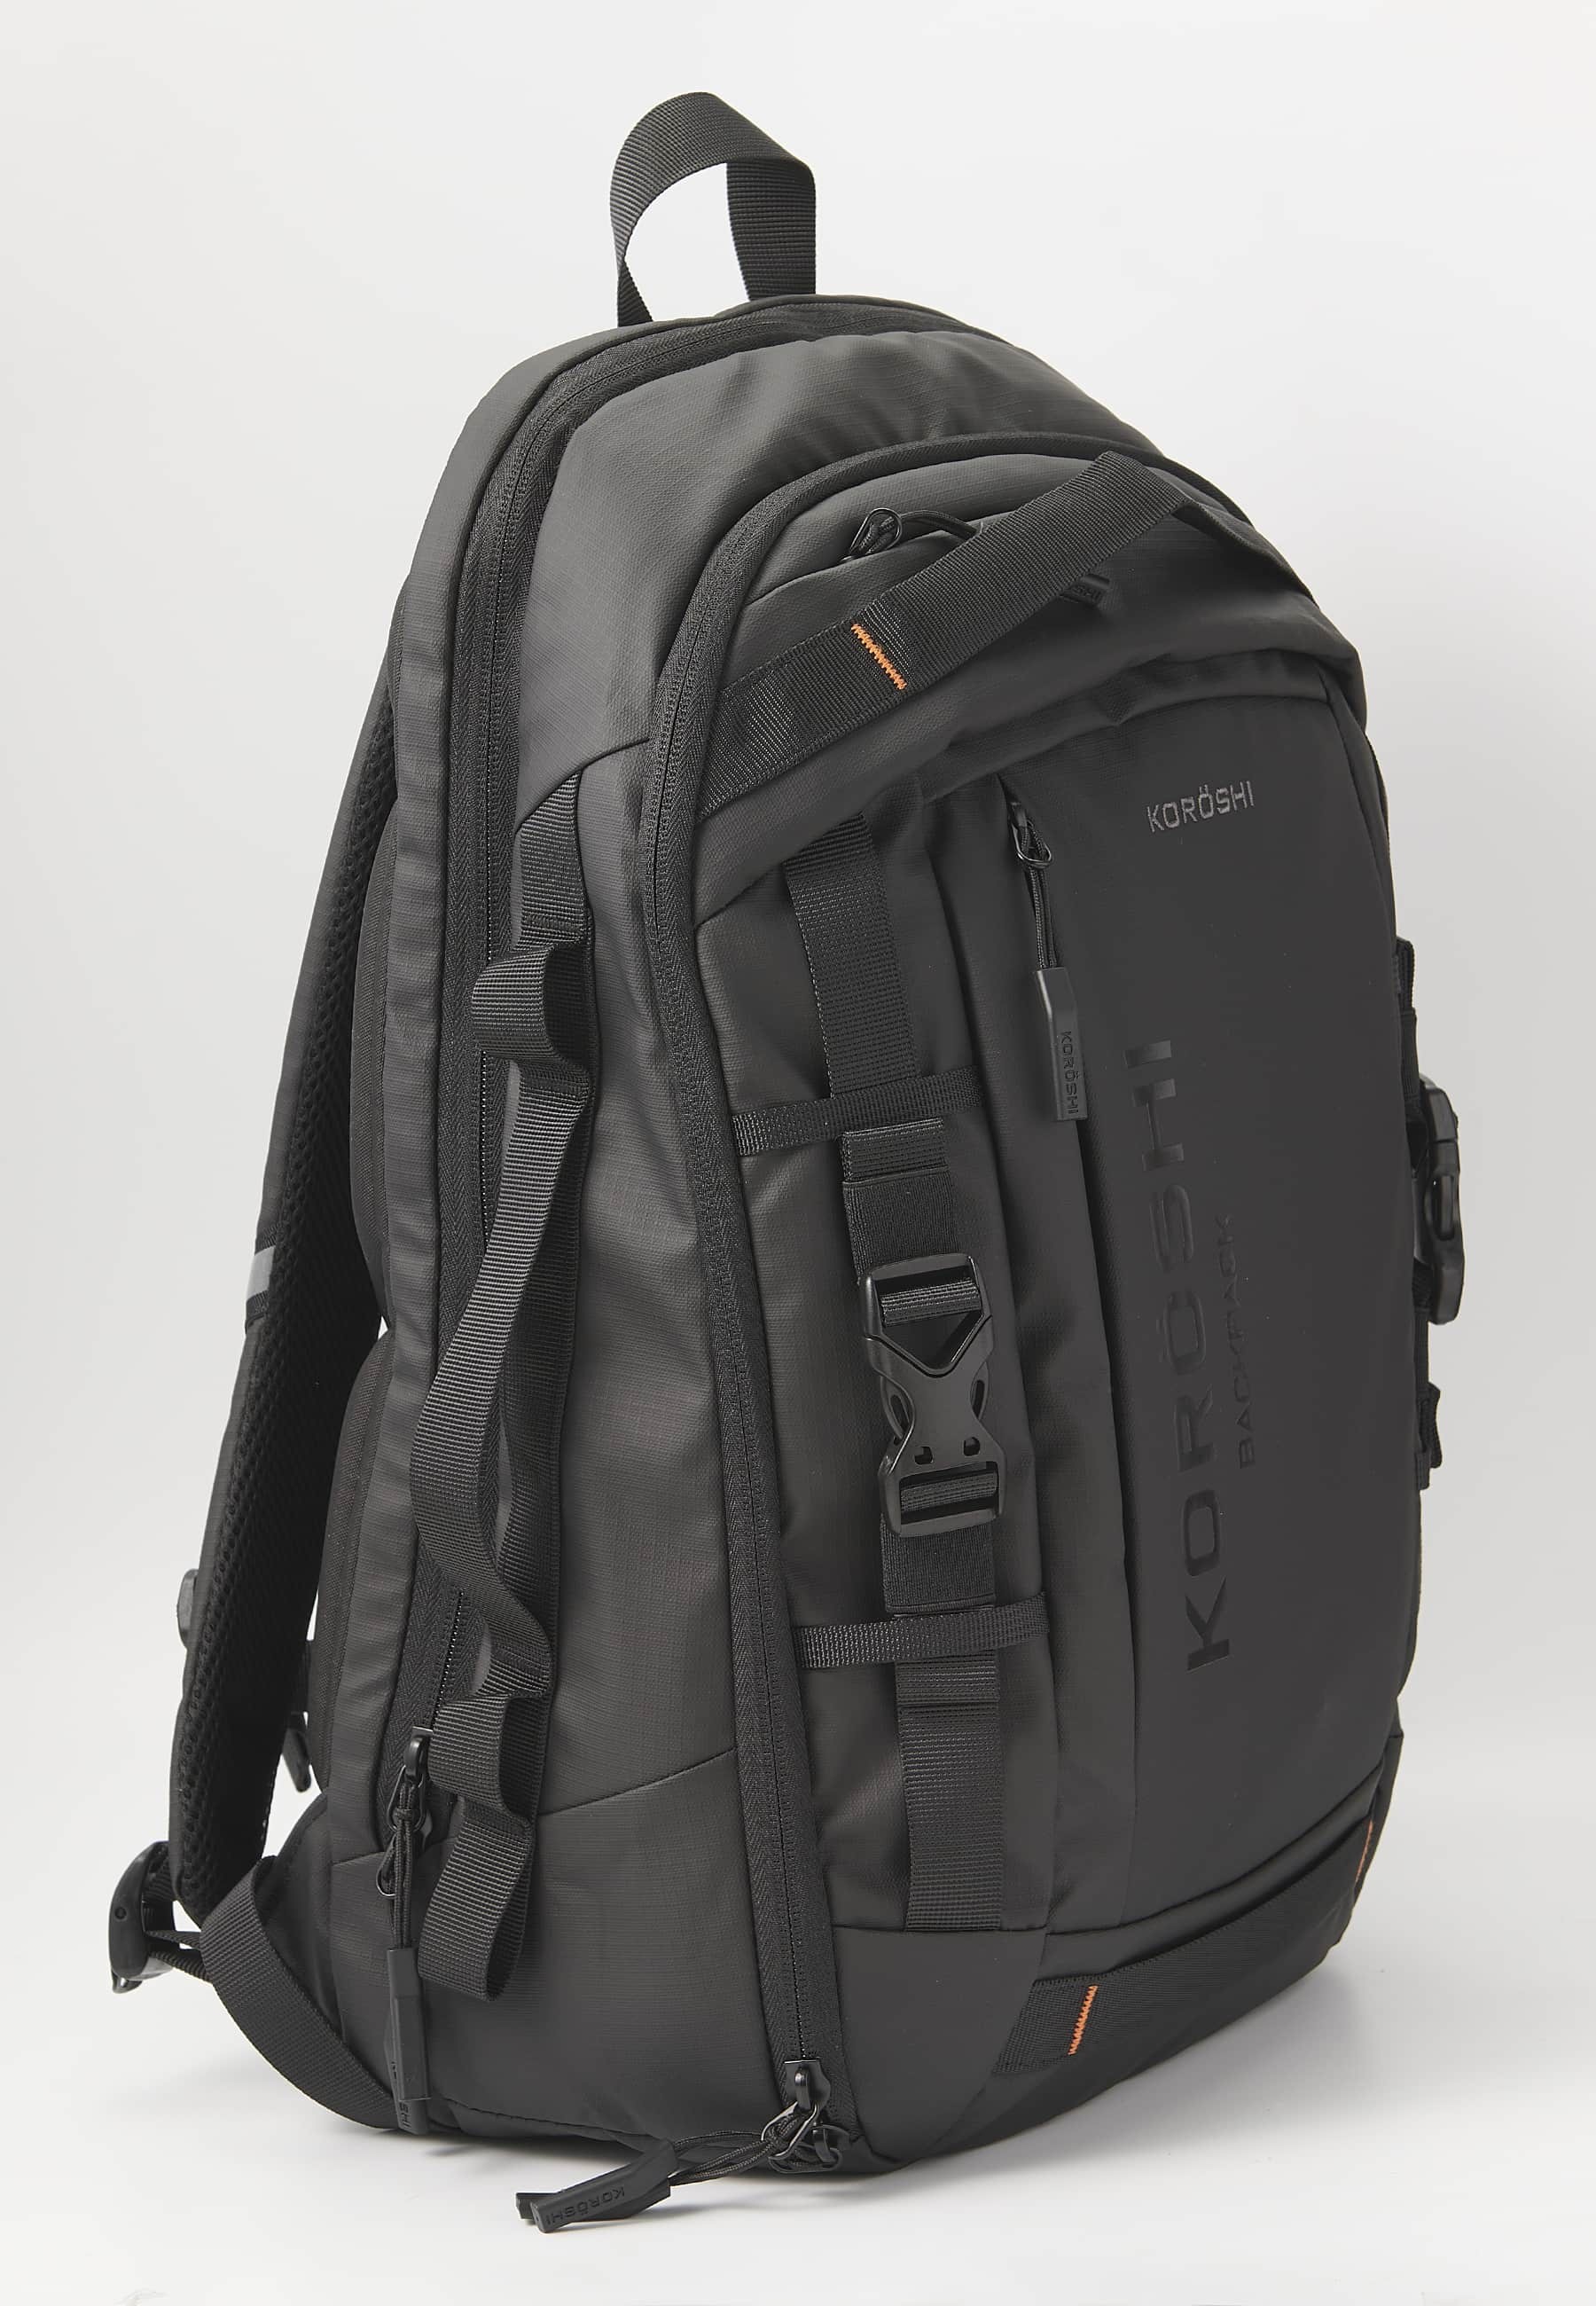 Koröshi backpack with two zippered compartments, one for a laptop and adjustable straps in Black